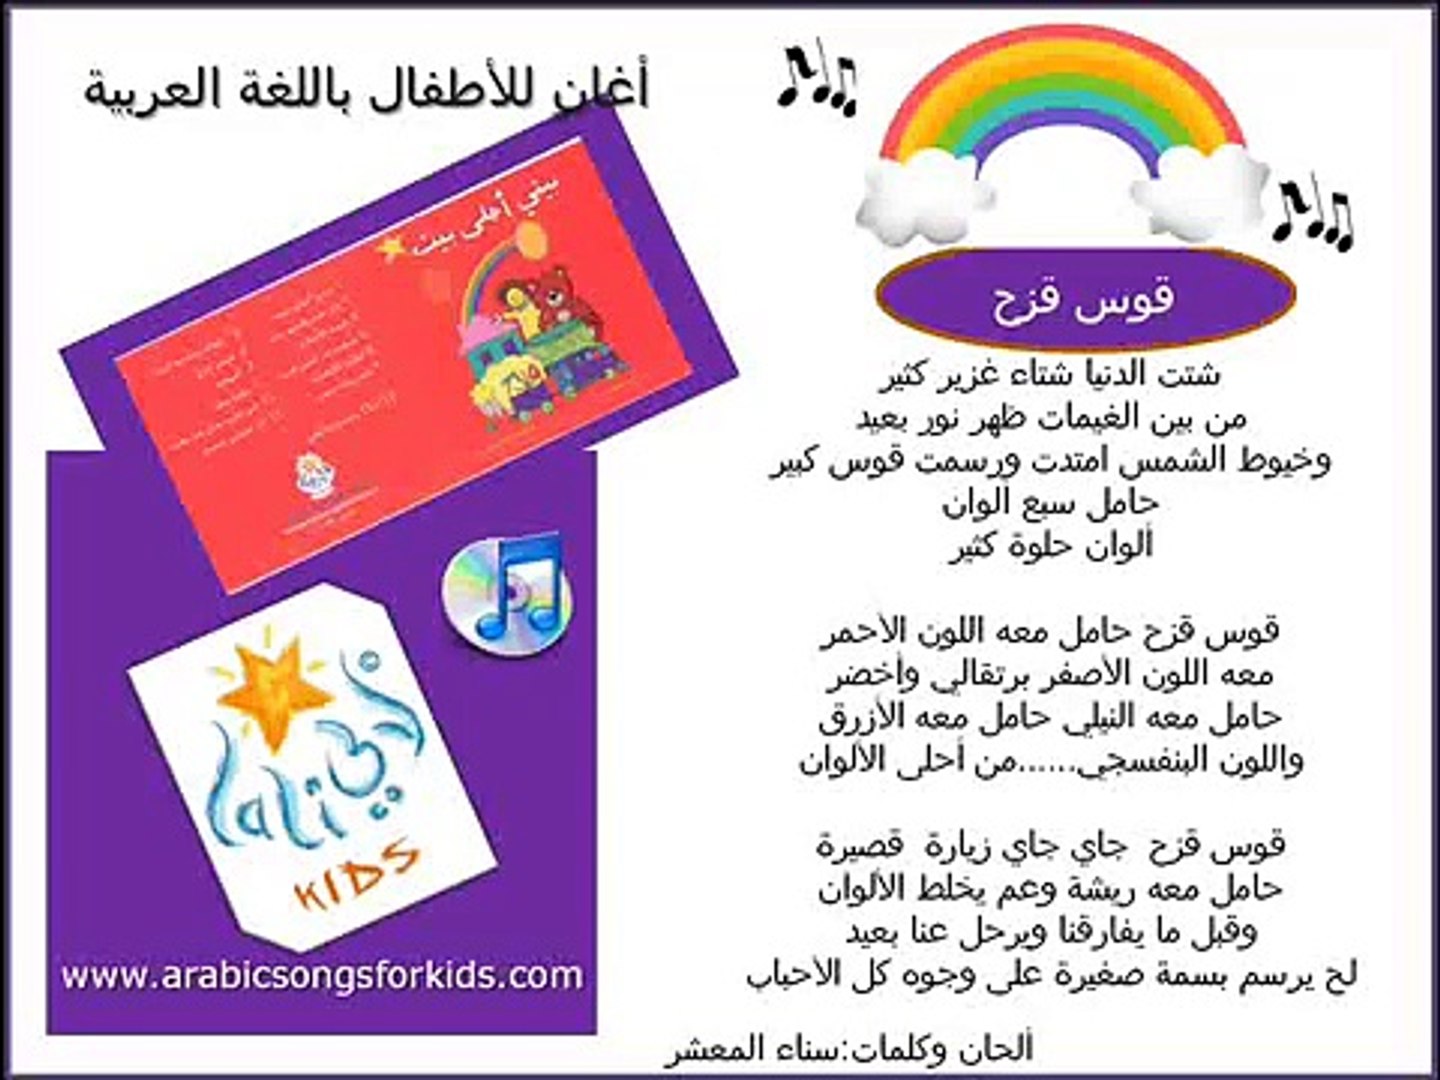 Arabic Songs For Kids Lali Kids The Rainbow قوس قزح